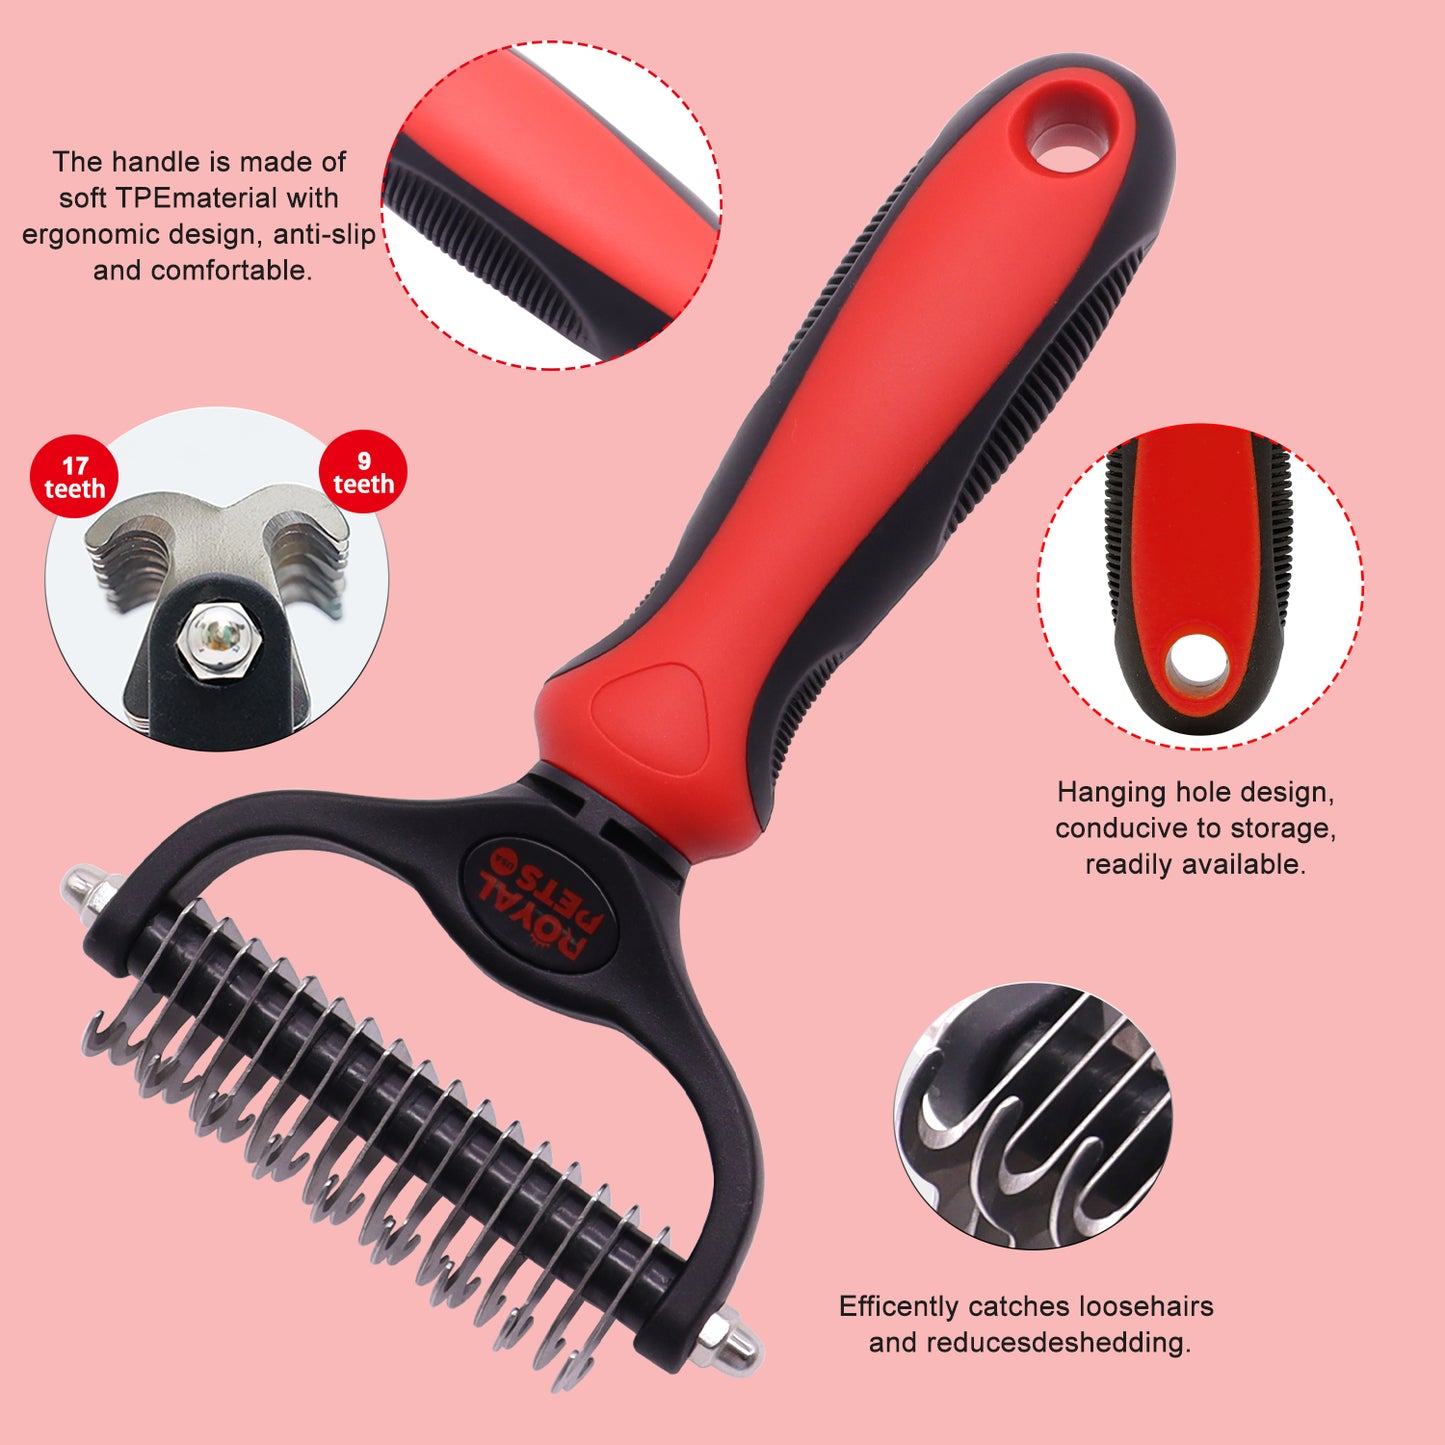 Royal Pets USA Grooming Tool - Professional Double-Sided Undercoat Rake & Extra Wide Grooming Comb, Dual Pack For Dogs & Cats for Shedding Detangling Matted and Knotted Undercoat Hair (Large)